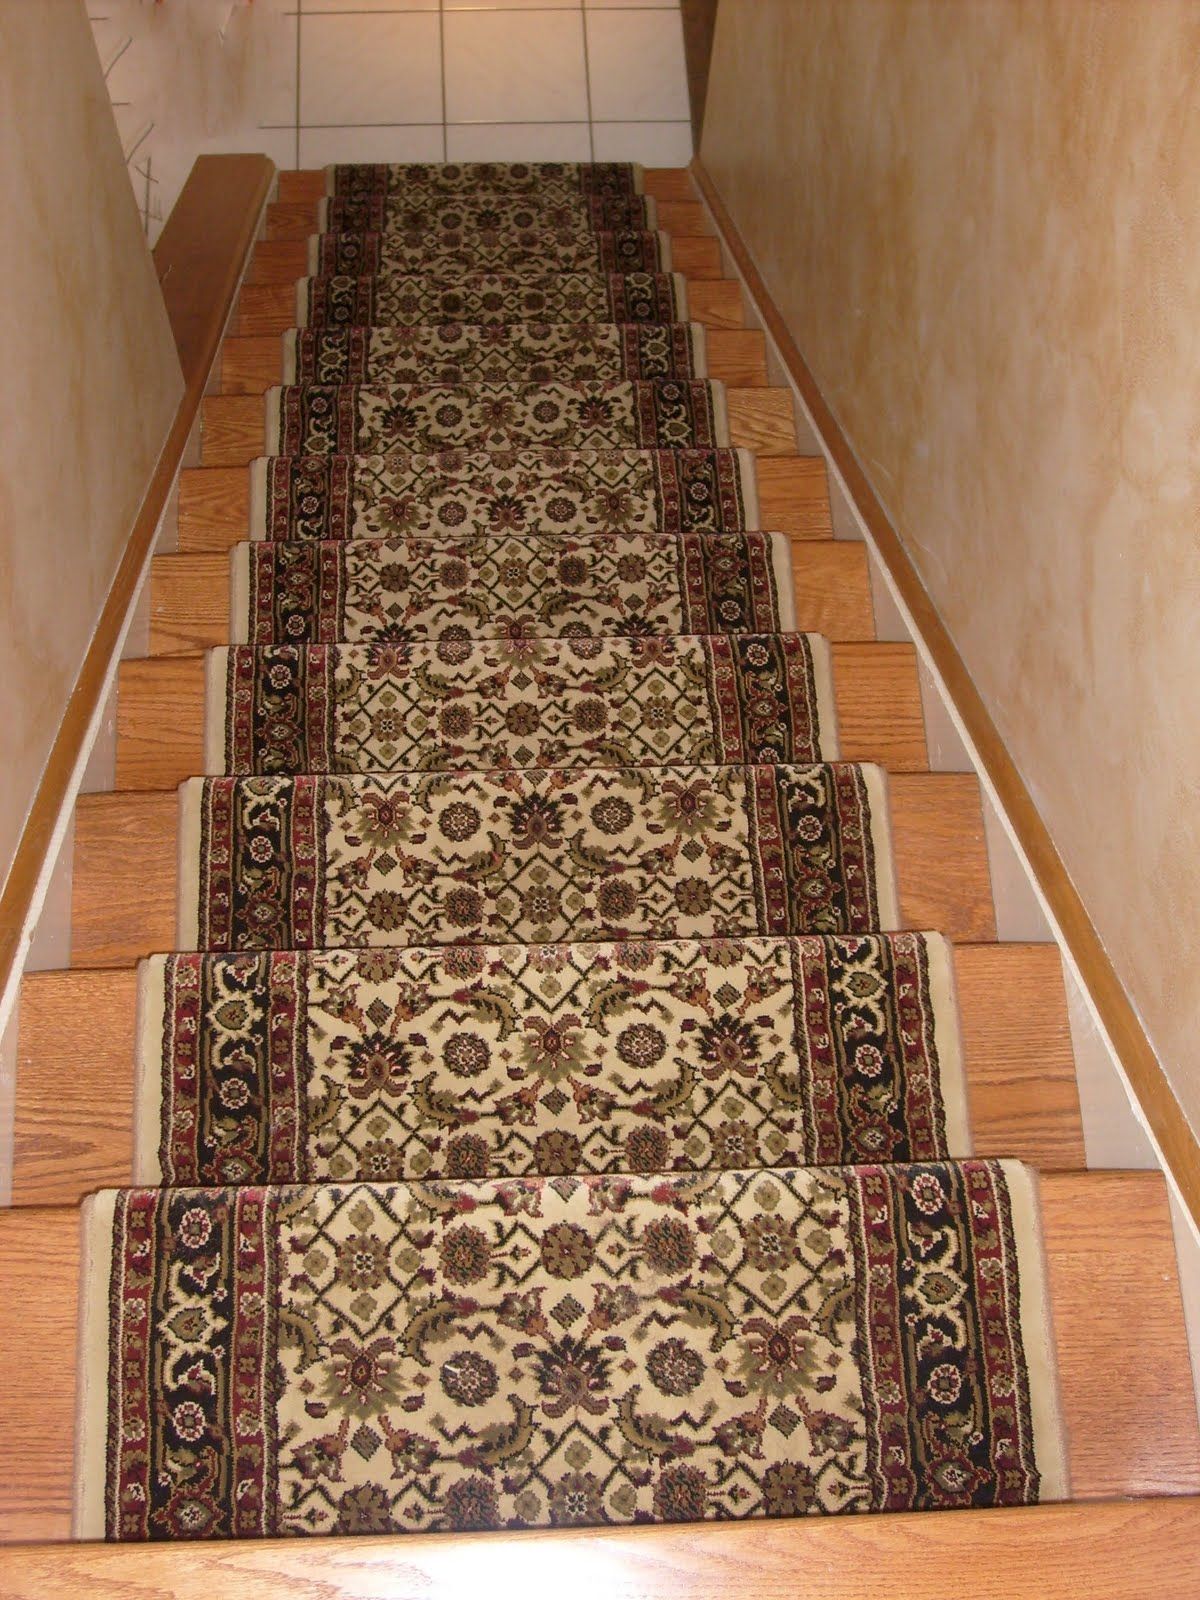 Special Stair Runners Latest Door Stair Design Throughout Carpets Runners For Stairs (View 19 of 20)